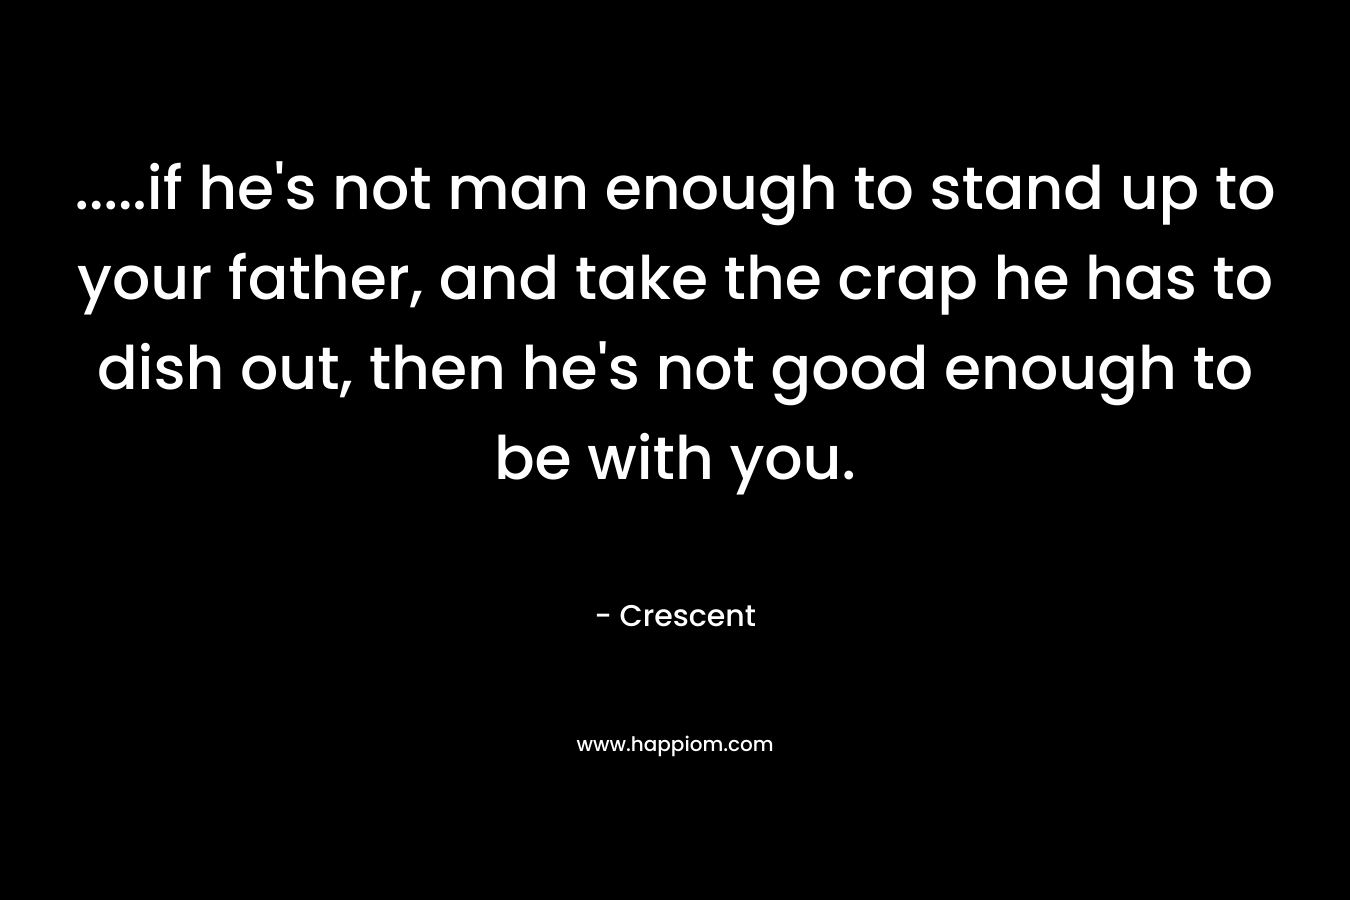 …..if he’s not man enough to stand up to your father, and take the crap he has to dish out, then he’s not good enough to be with you. – Crescent